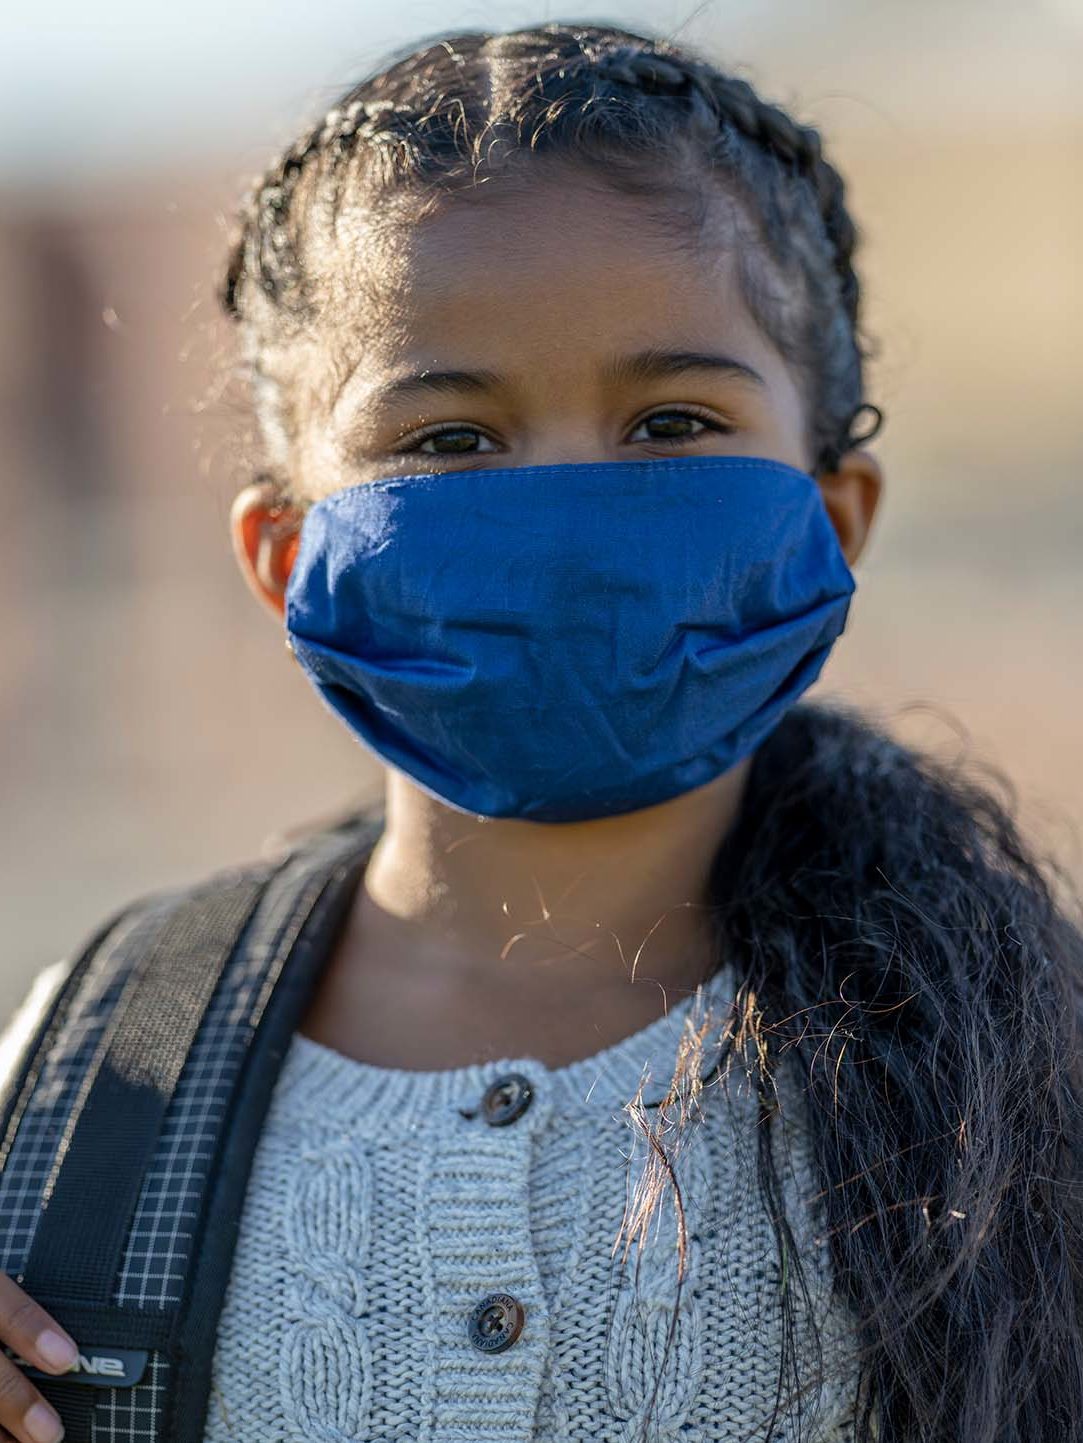 Portrait of a student wearing a protective face covering while on school property during the COVID-19 outbreak.